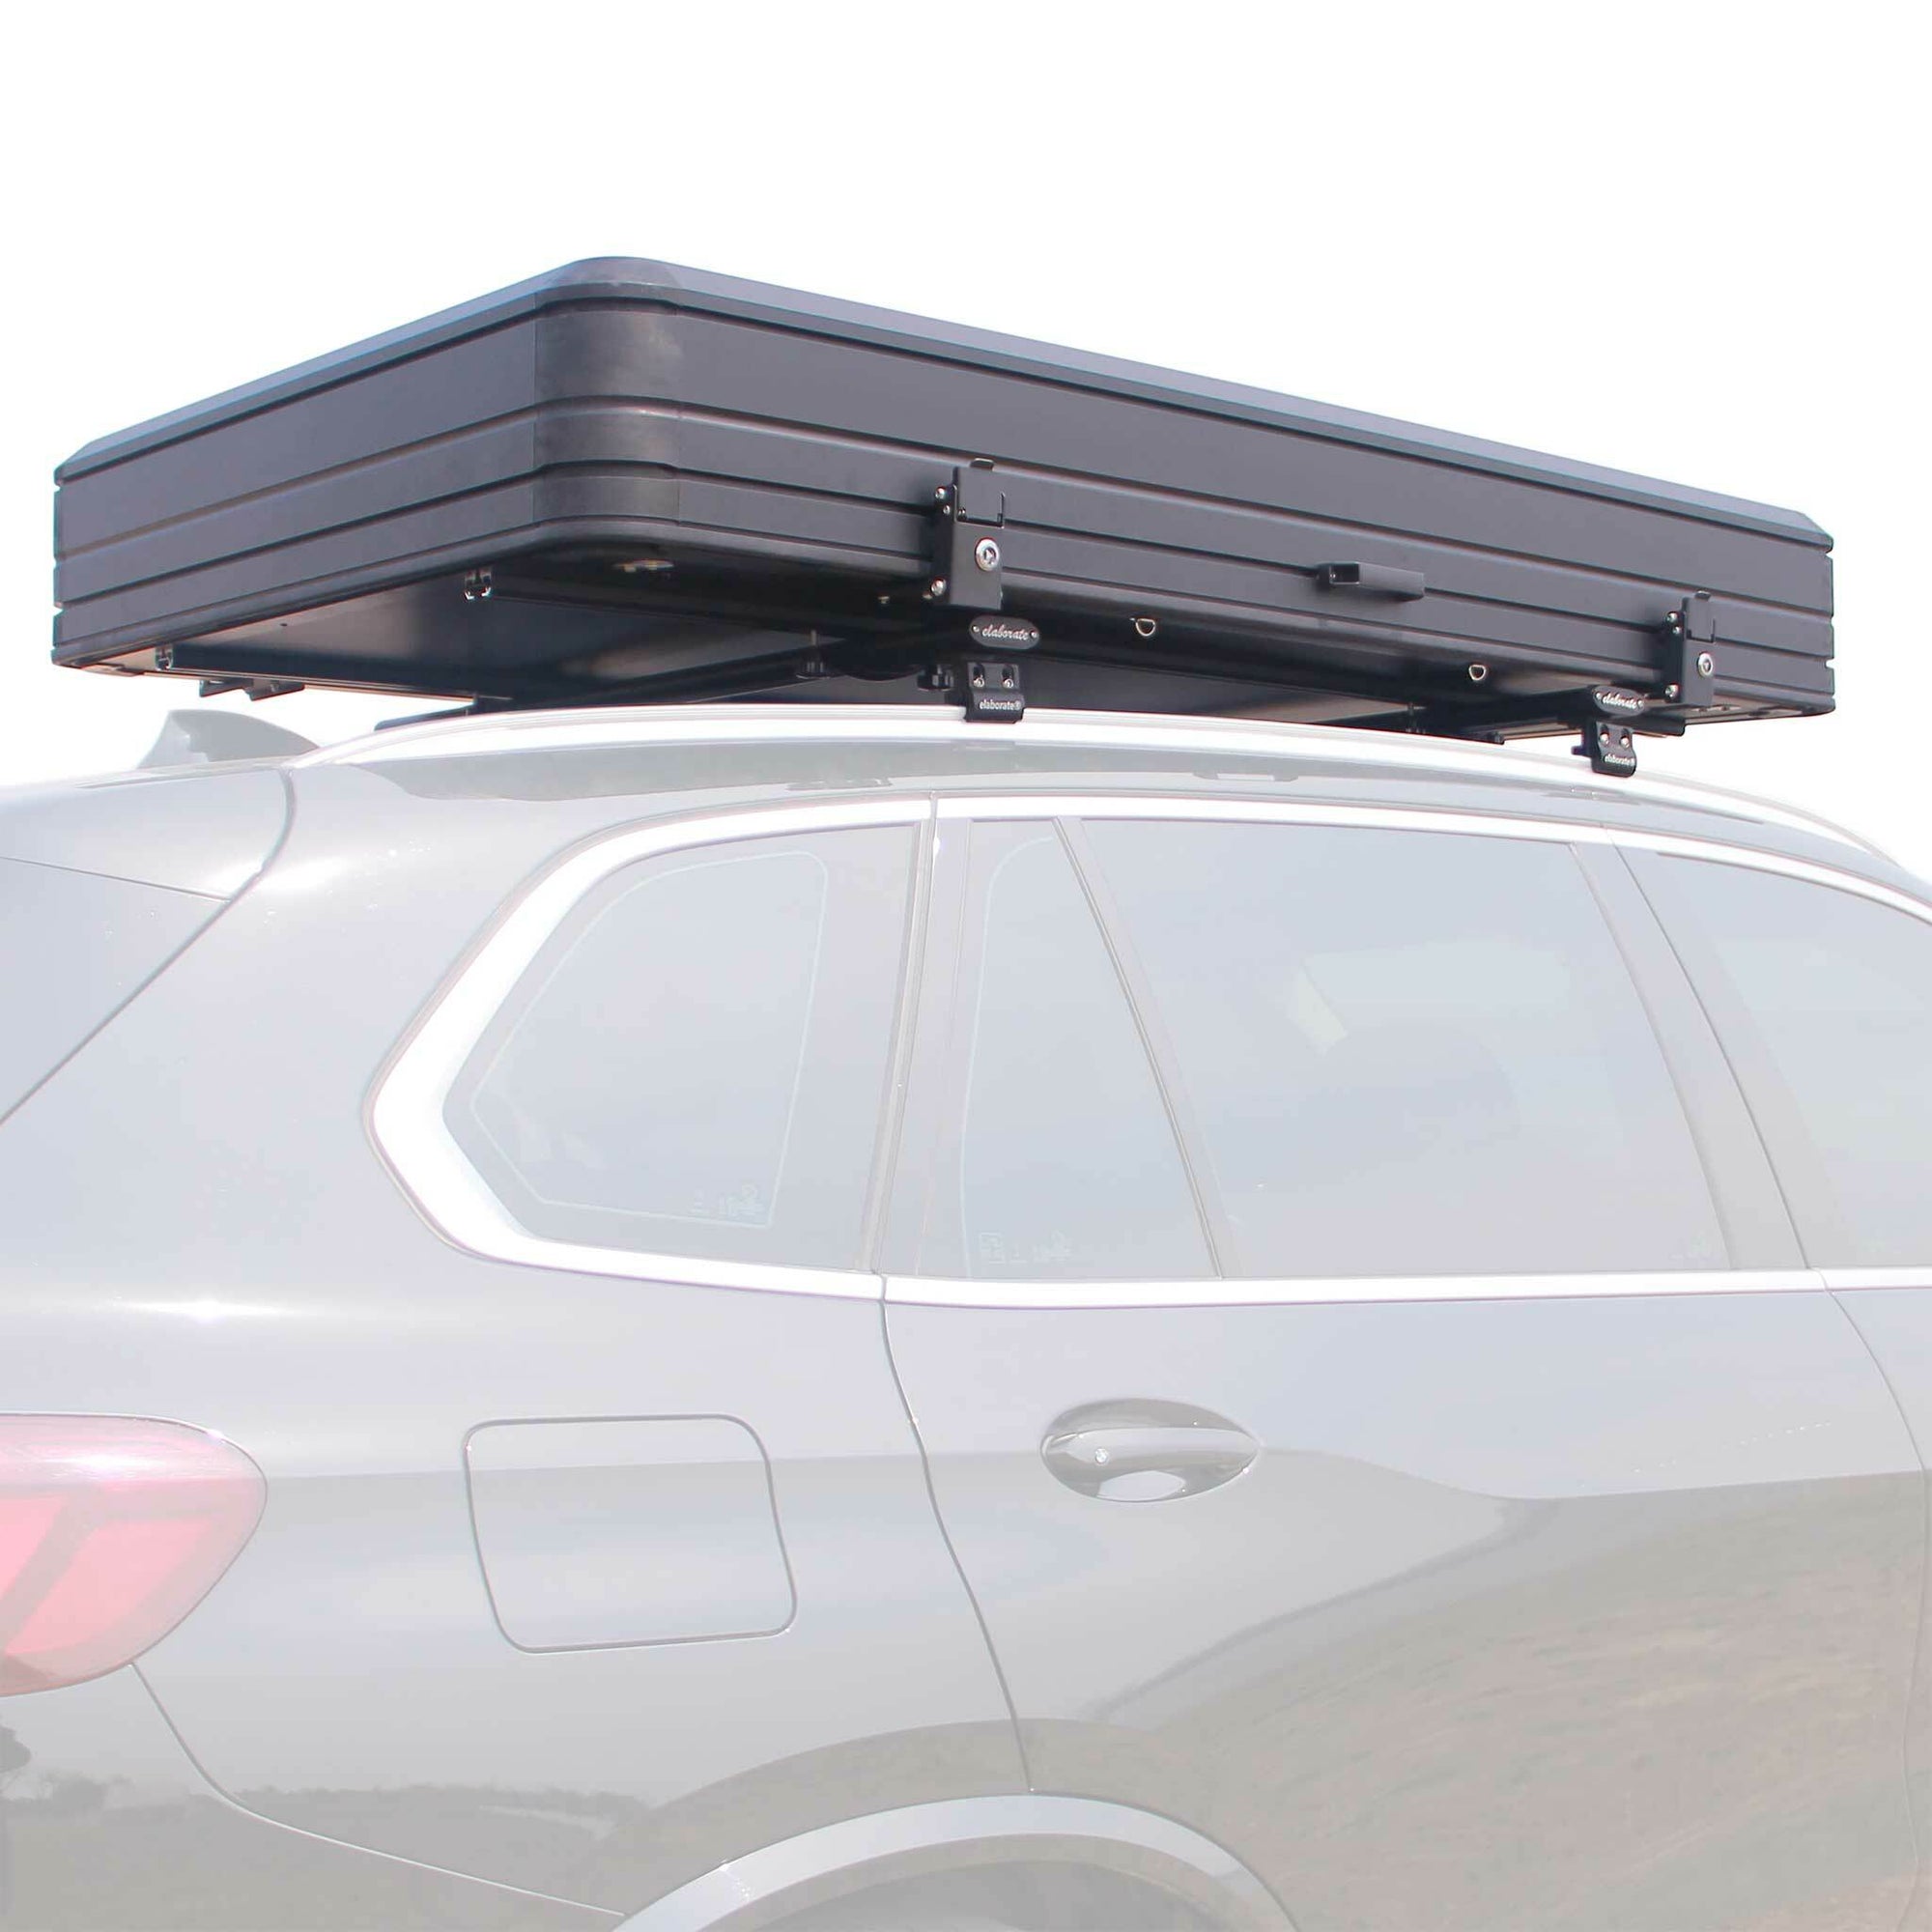 Nordcore Rooftop tent Summit Pro XL, Black